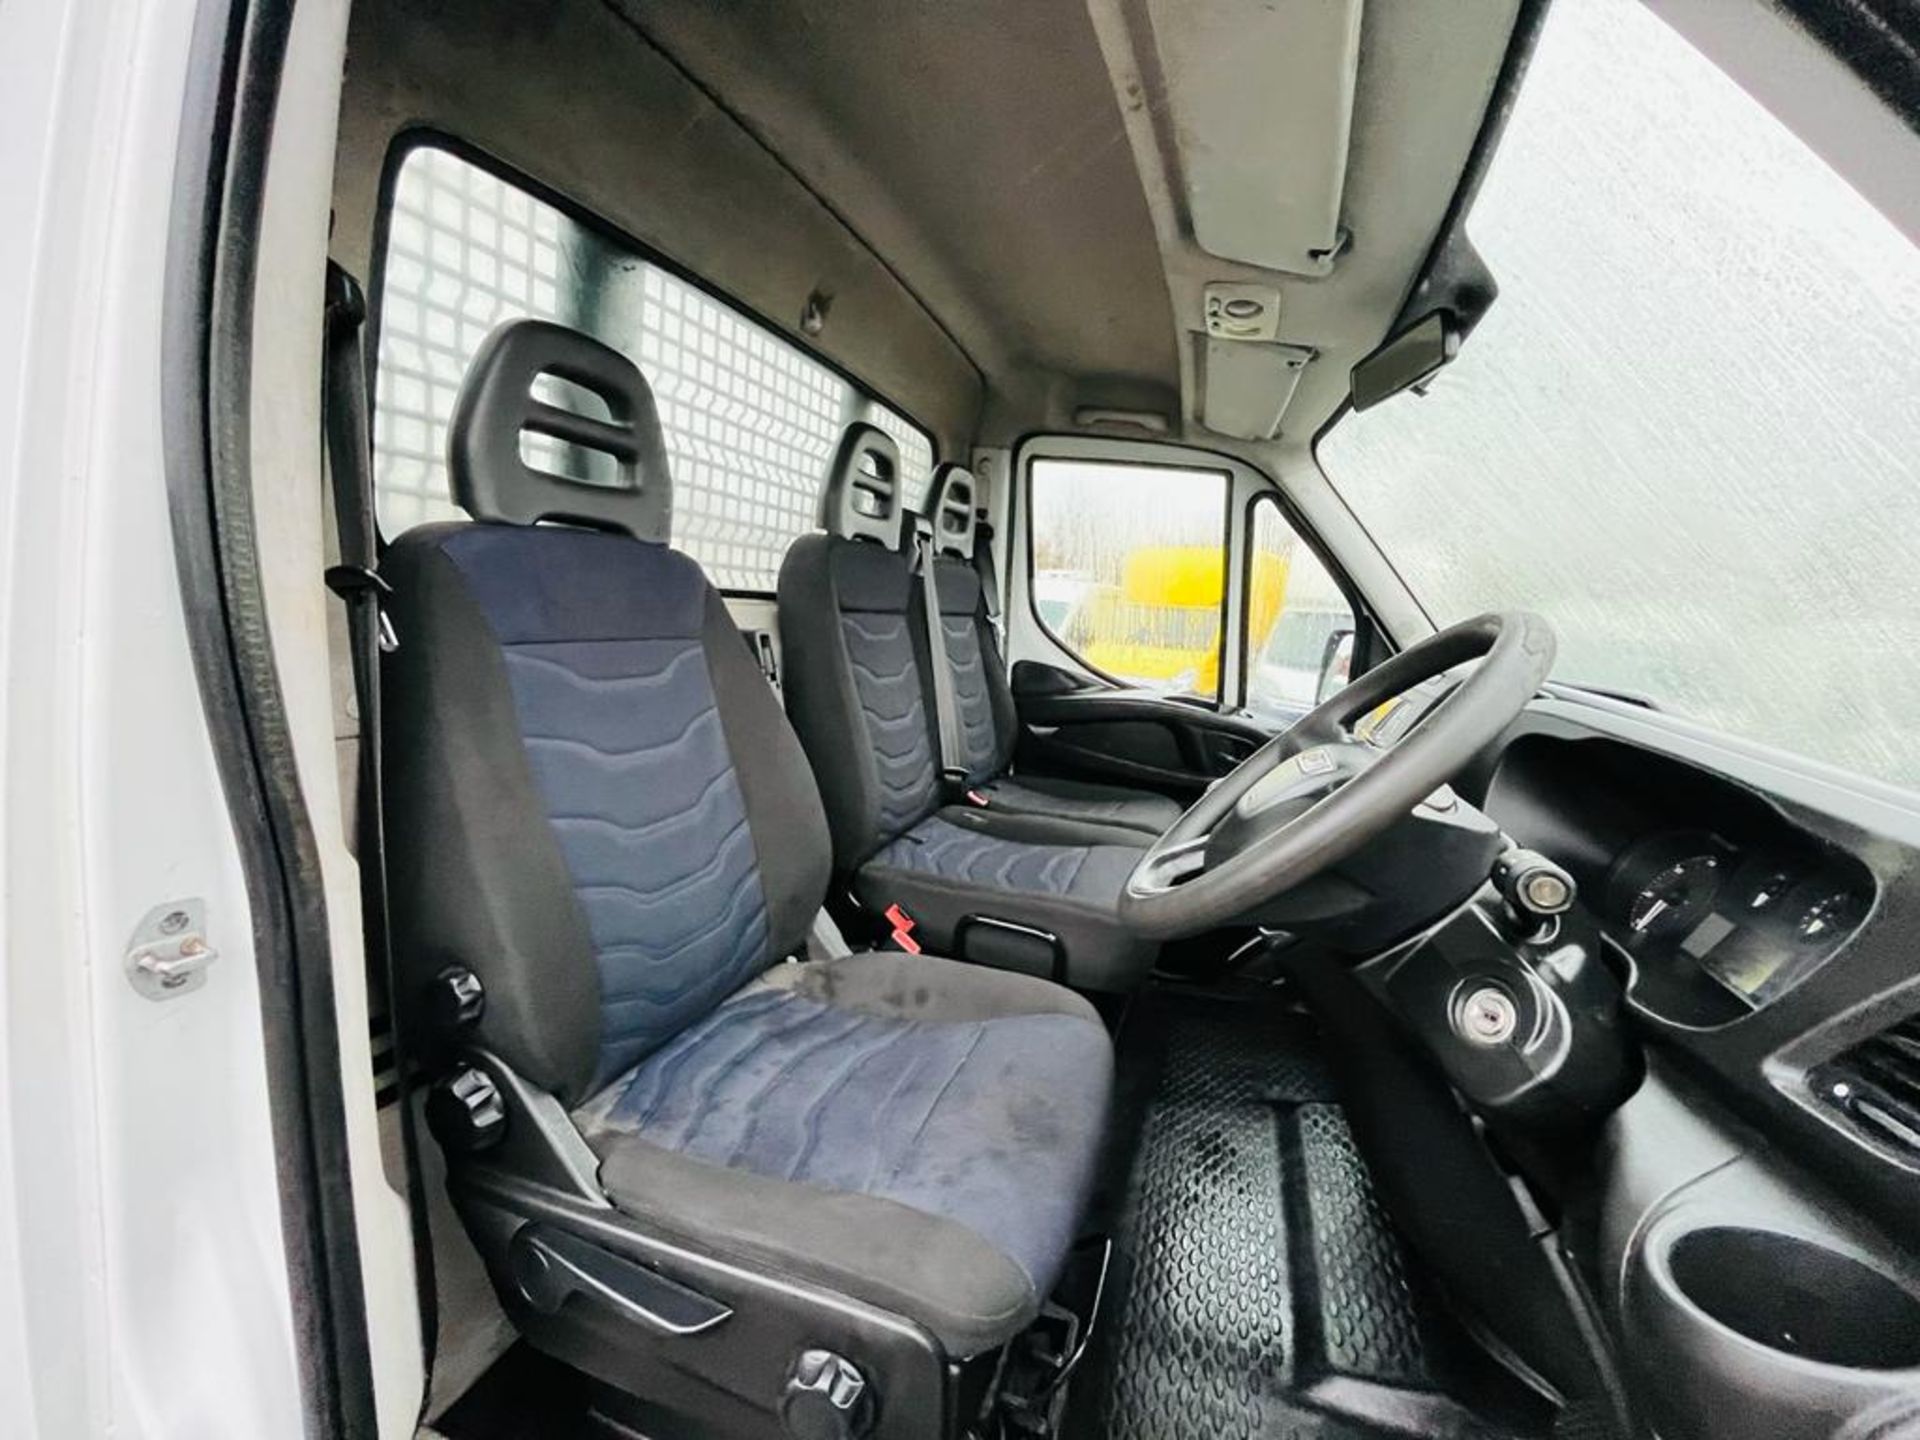 ** ON SALE **Iveco Daily 35C14 2.3 HPI 2018 '68 Reg' Alloy Dropside - ULEZ Compliant - Image 12 of 20